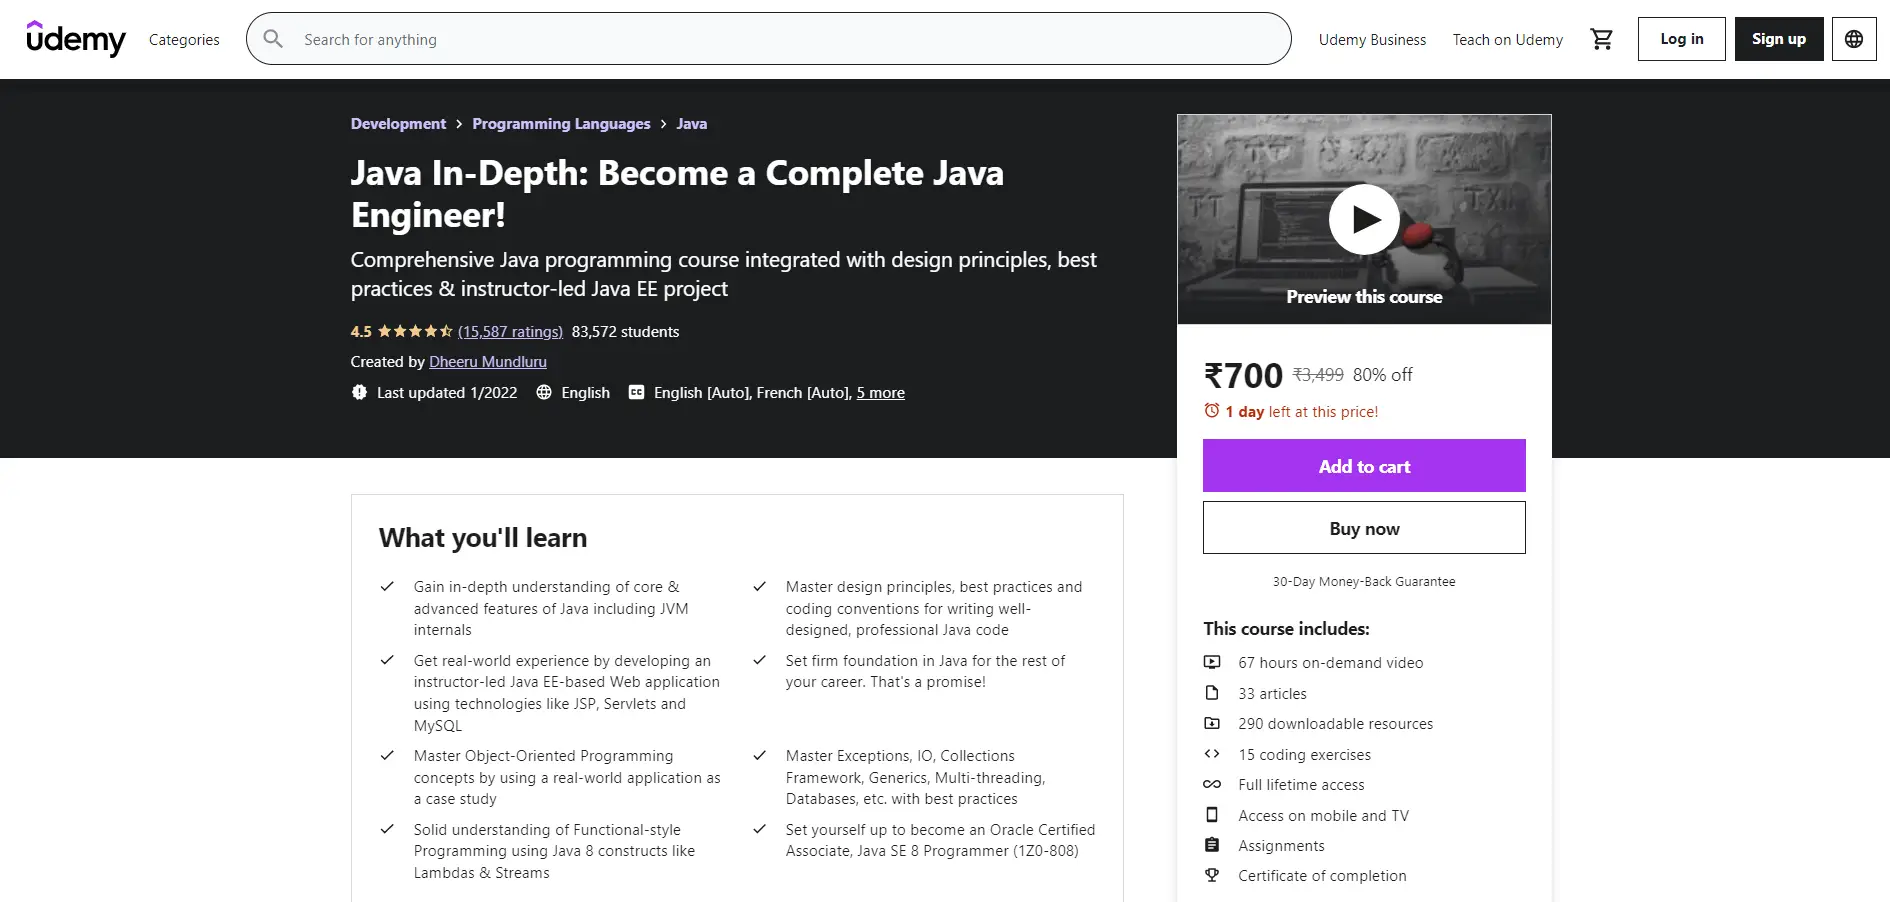 Java In-Depth: Become a Complete Java Engineer!